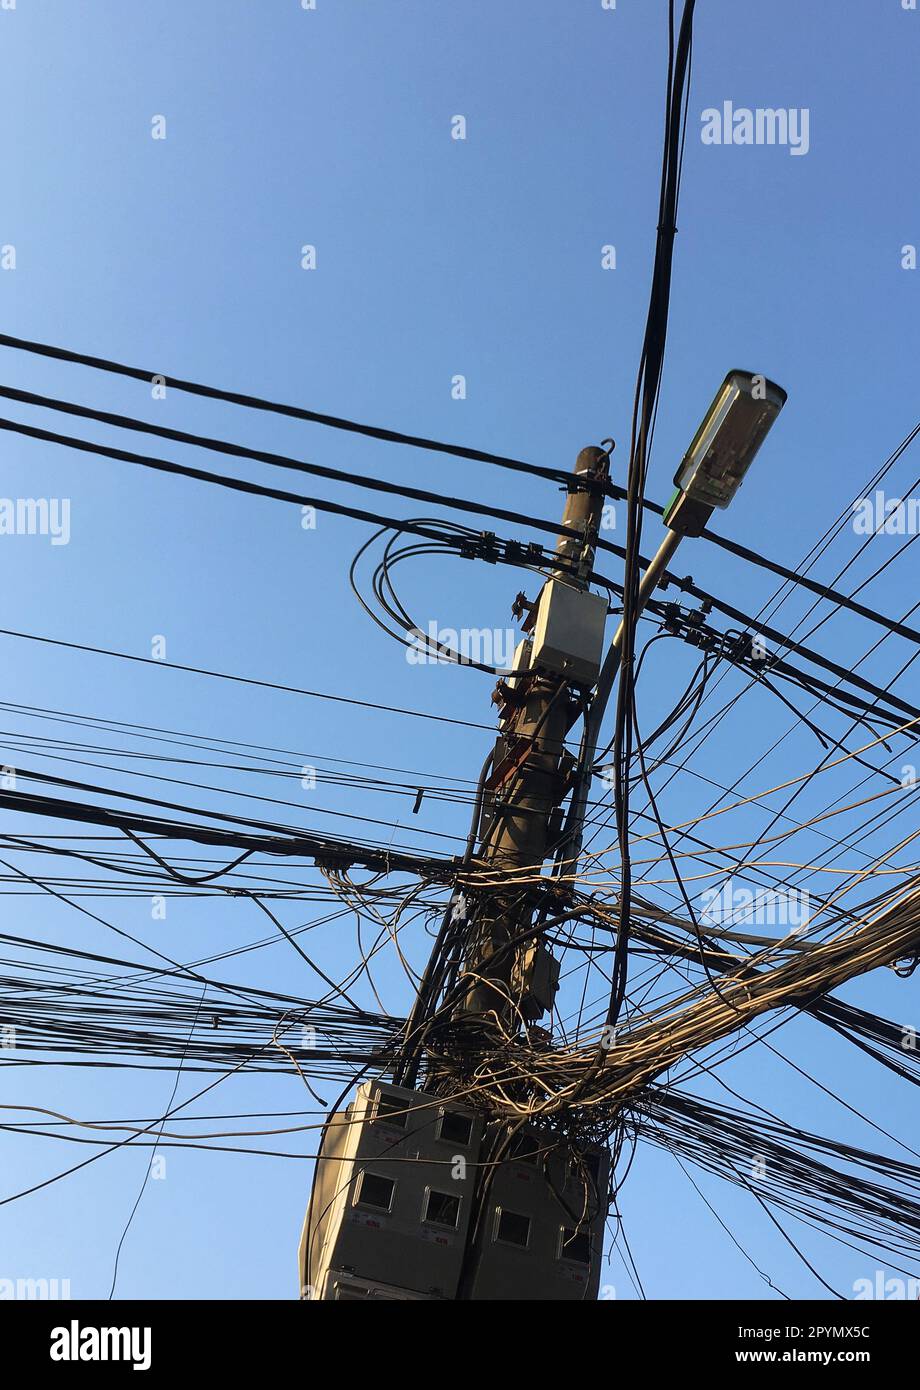 Electricity poles with very natural wires are typical symbols throughout Vietnam Stock Photo